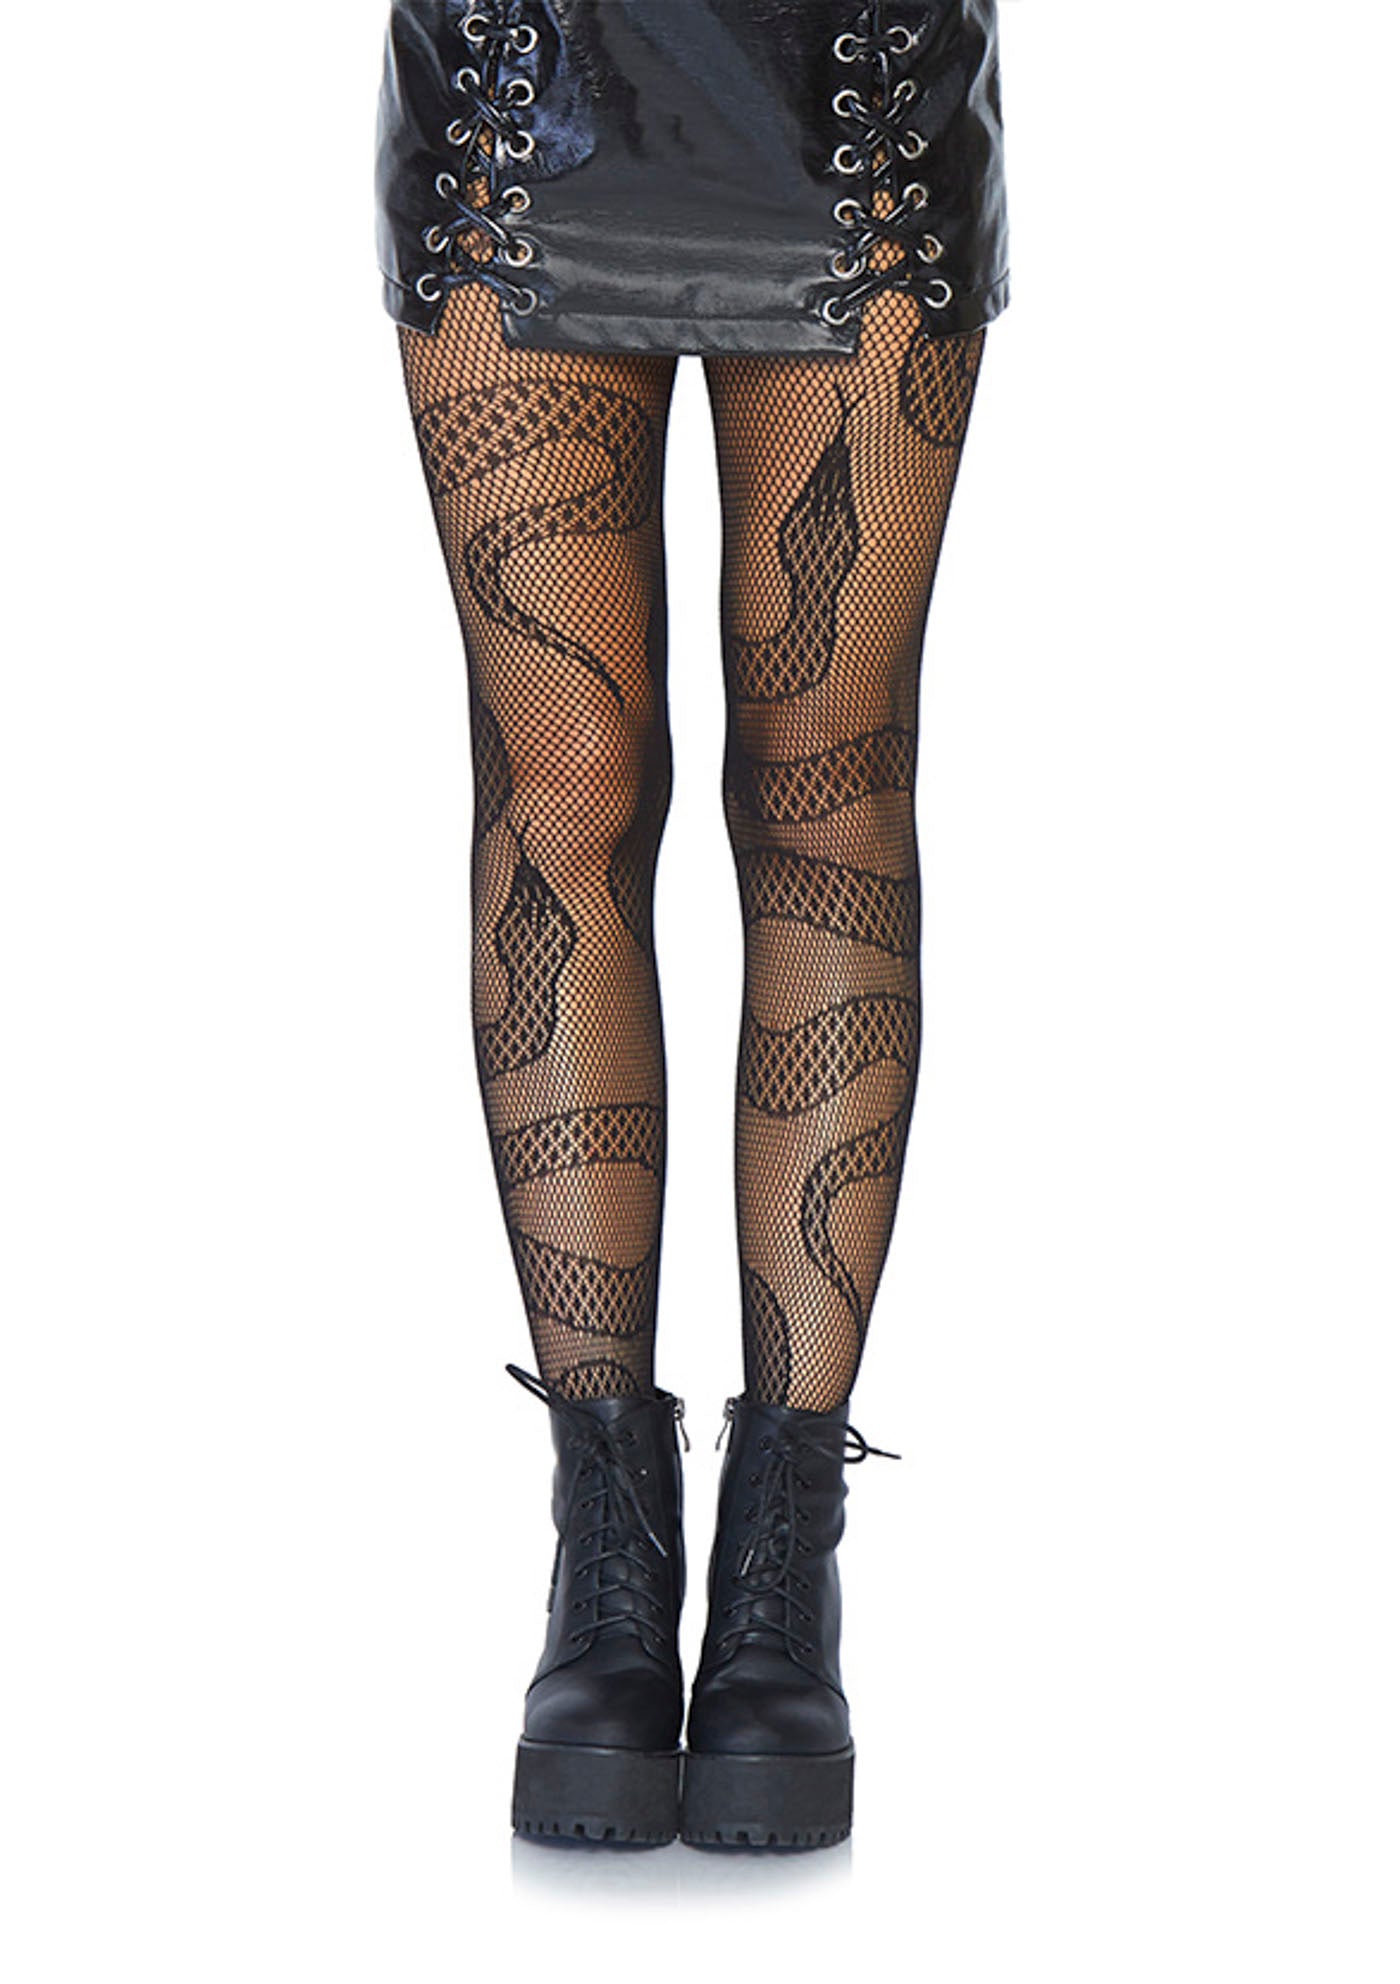 Leg Avenue 8143 Snake net tights - black openwork fishnet tights with all over snakes